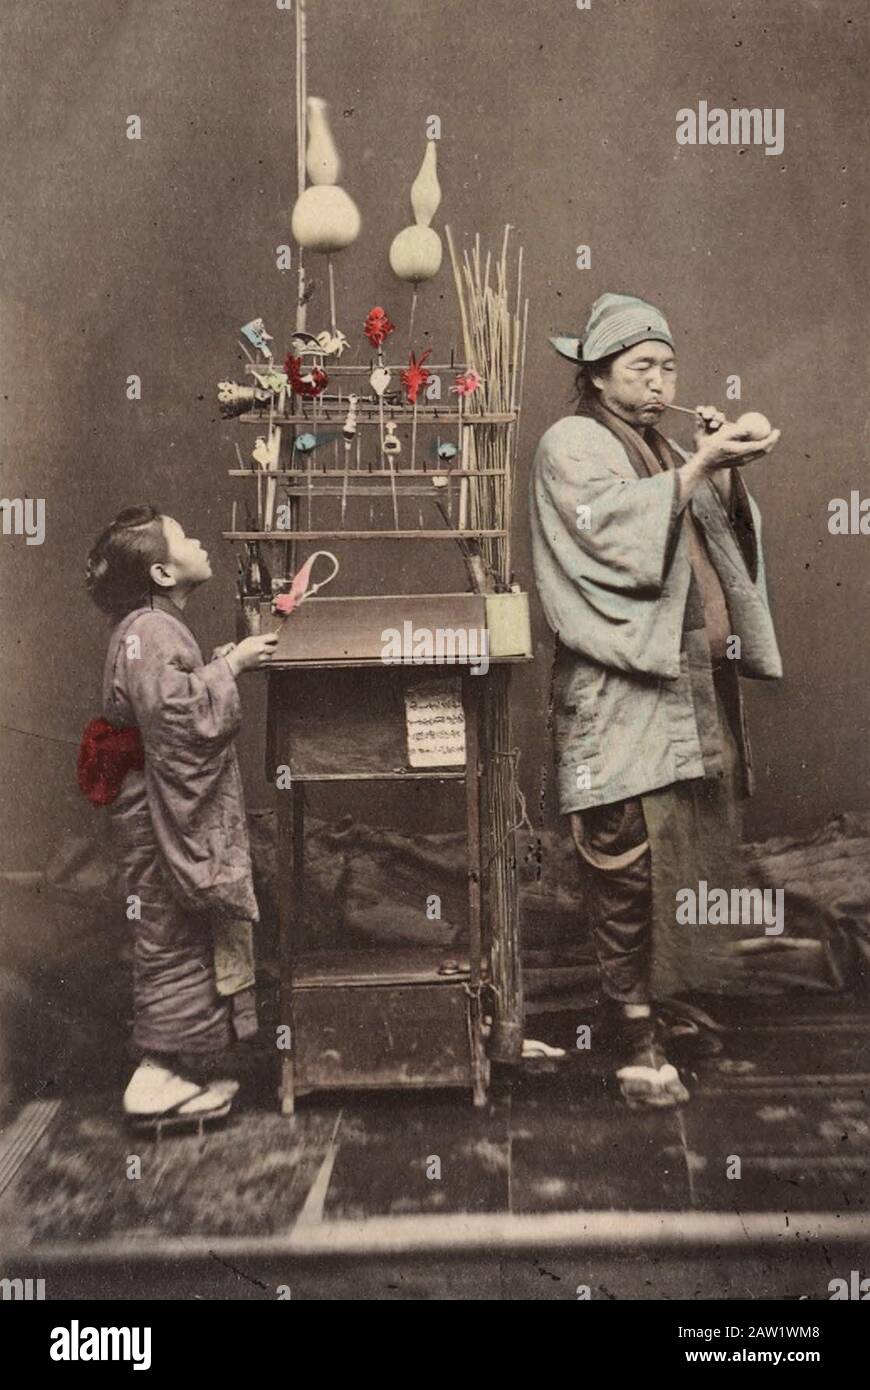 Itinerant Candy Seller in Japan, circa 1890 - The confections made from a paste are blown like glass into various shapes and allowed to harden Stock Photo